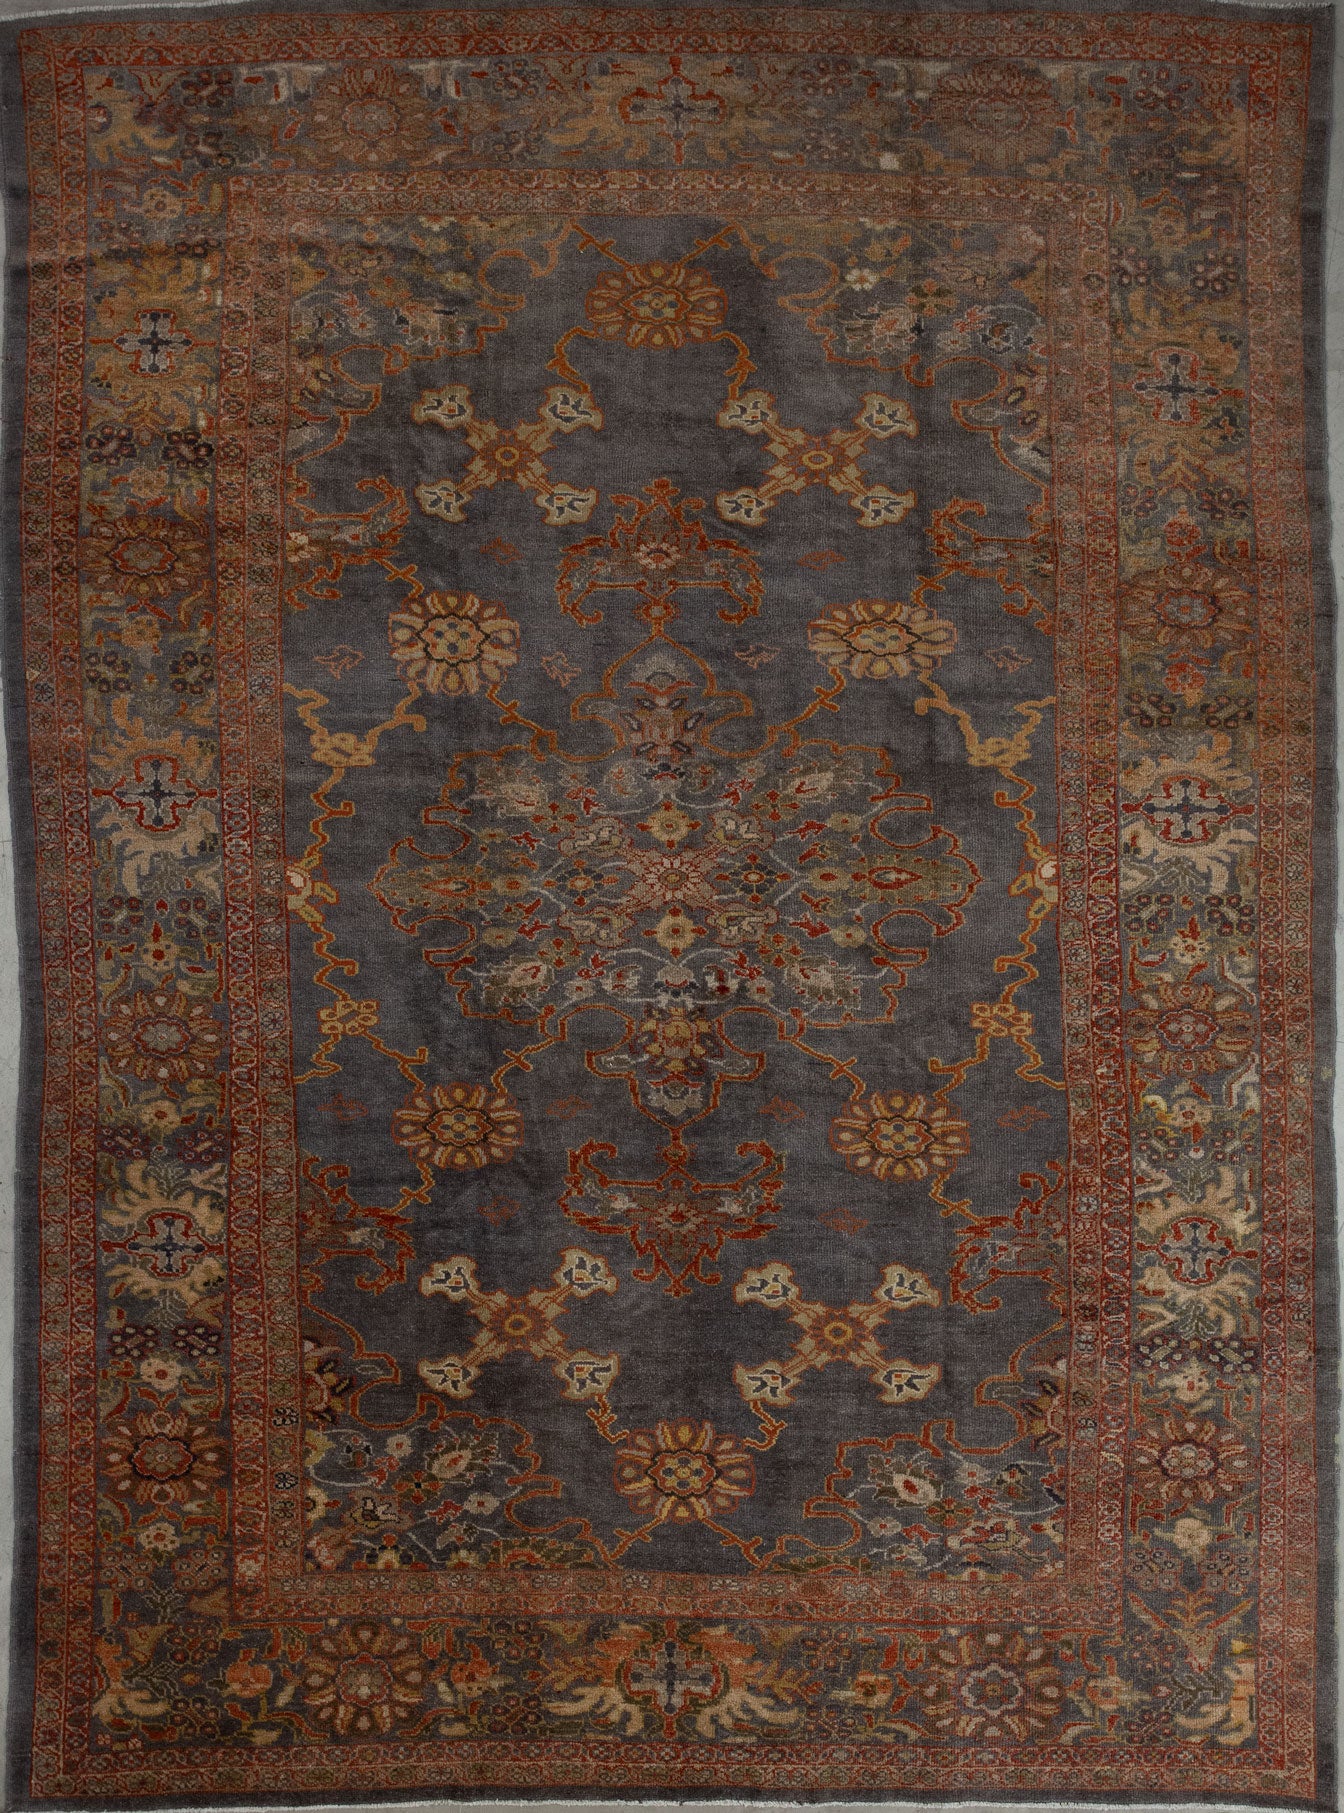 This ancestral rug knitted with dark gray background that comes with a convenient color scheme which is yellow, orange, white, and green.